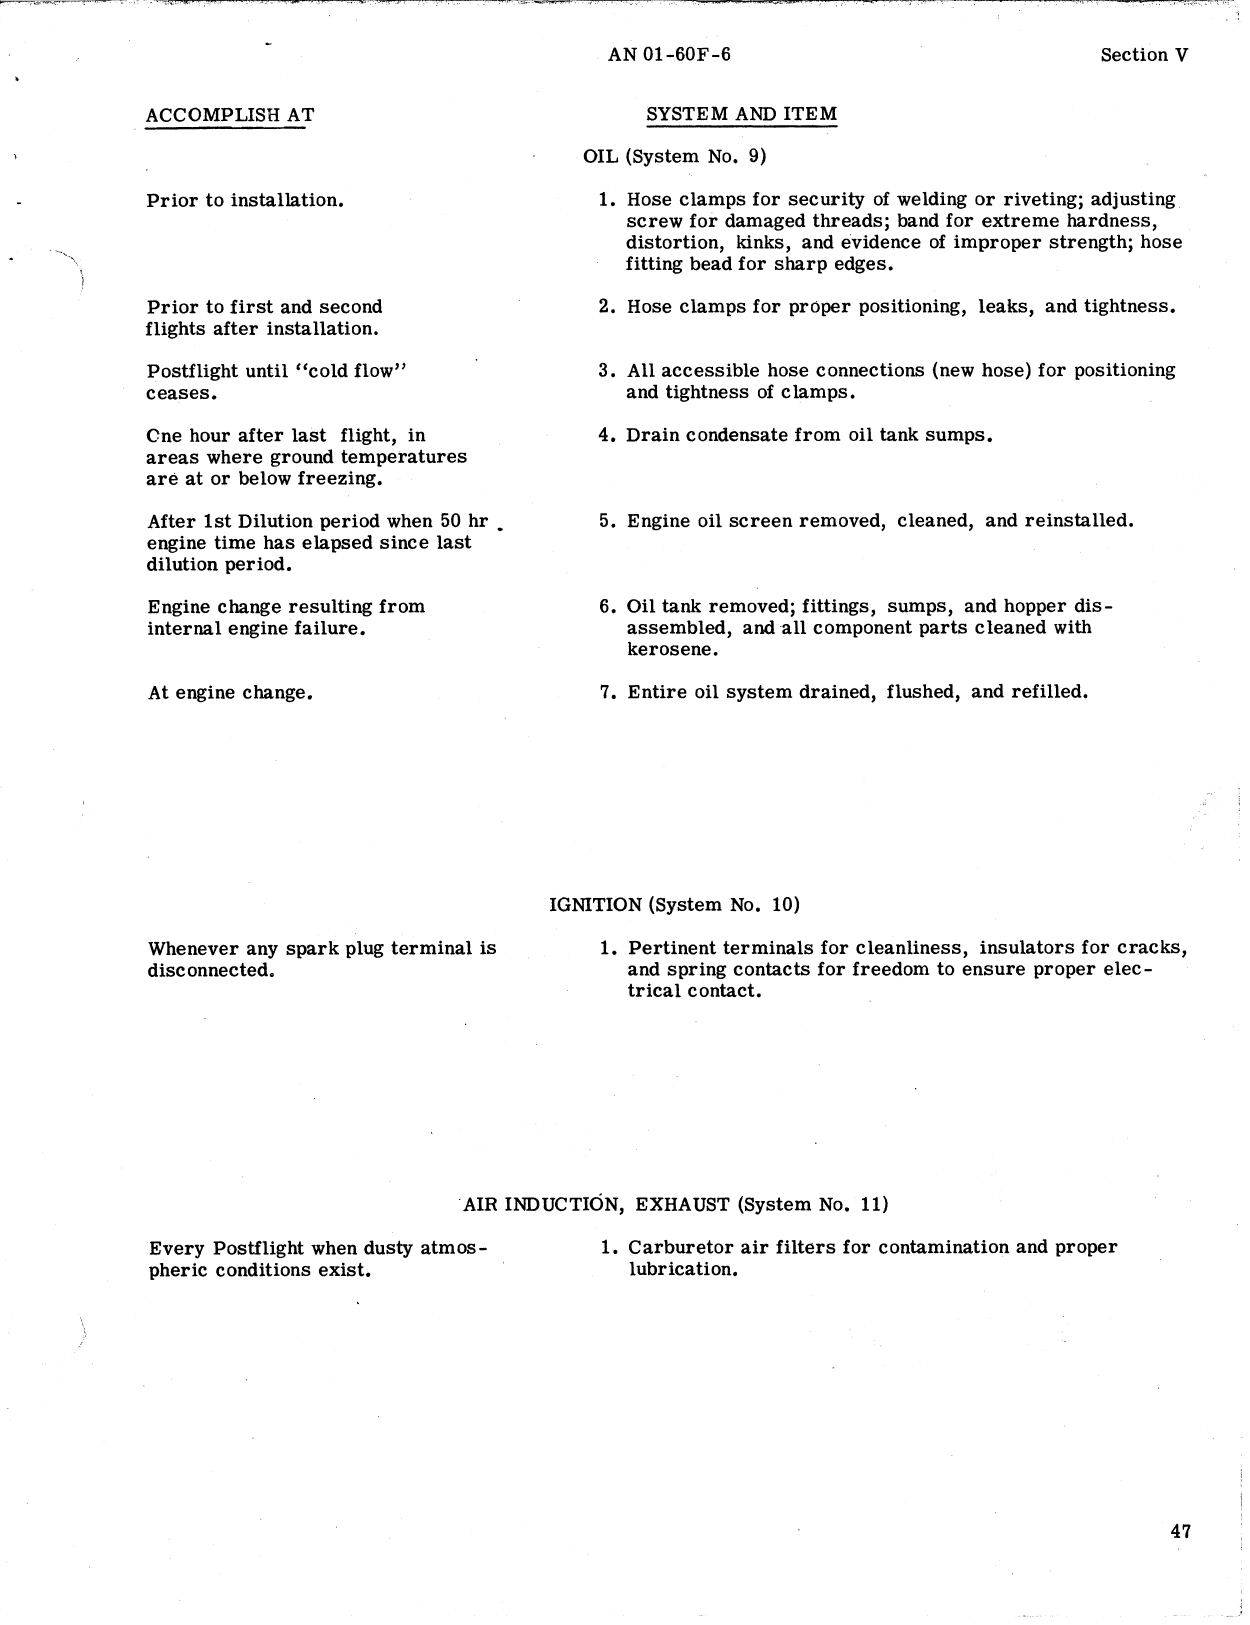 Sample page 49 from AirCorps Library document: Inspection Requirements T-6 / SNJ